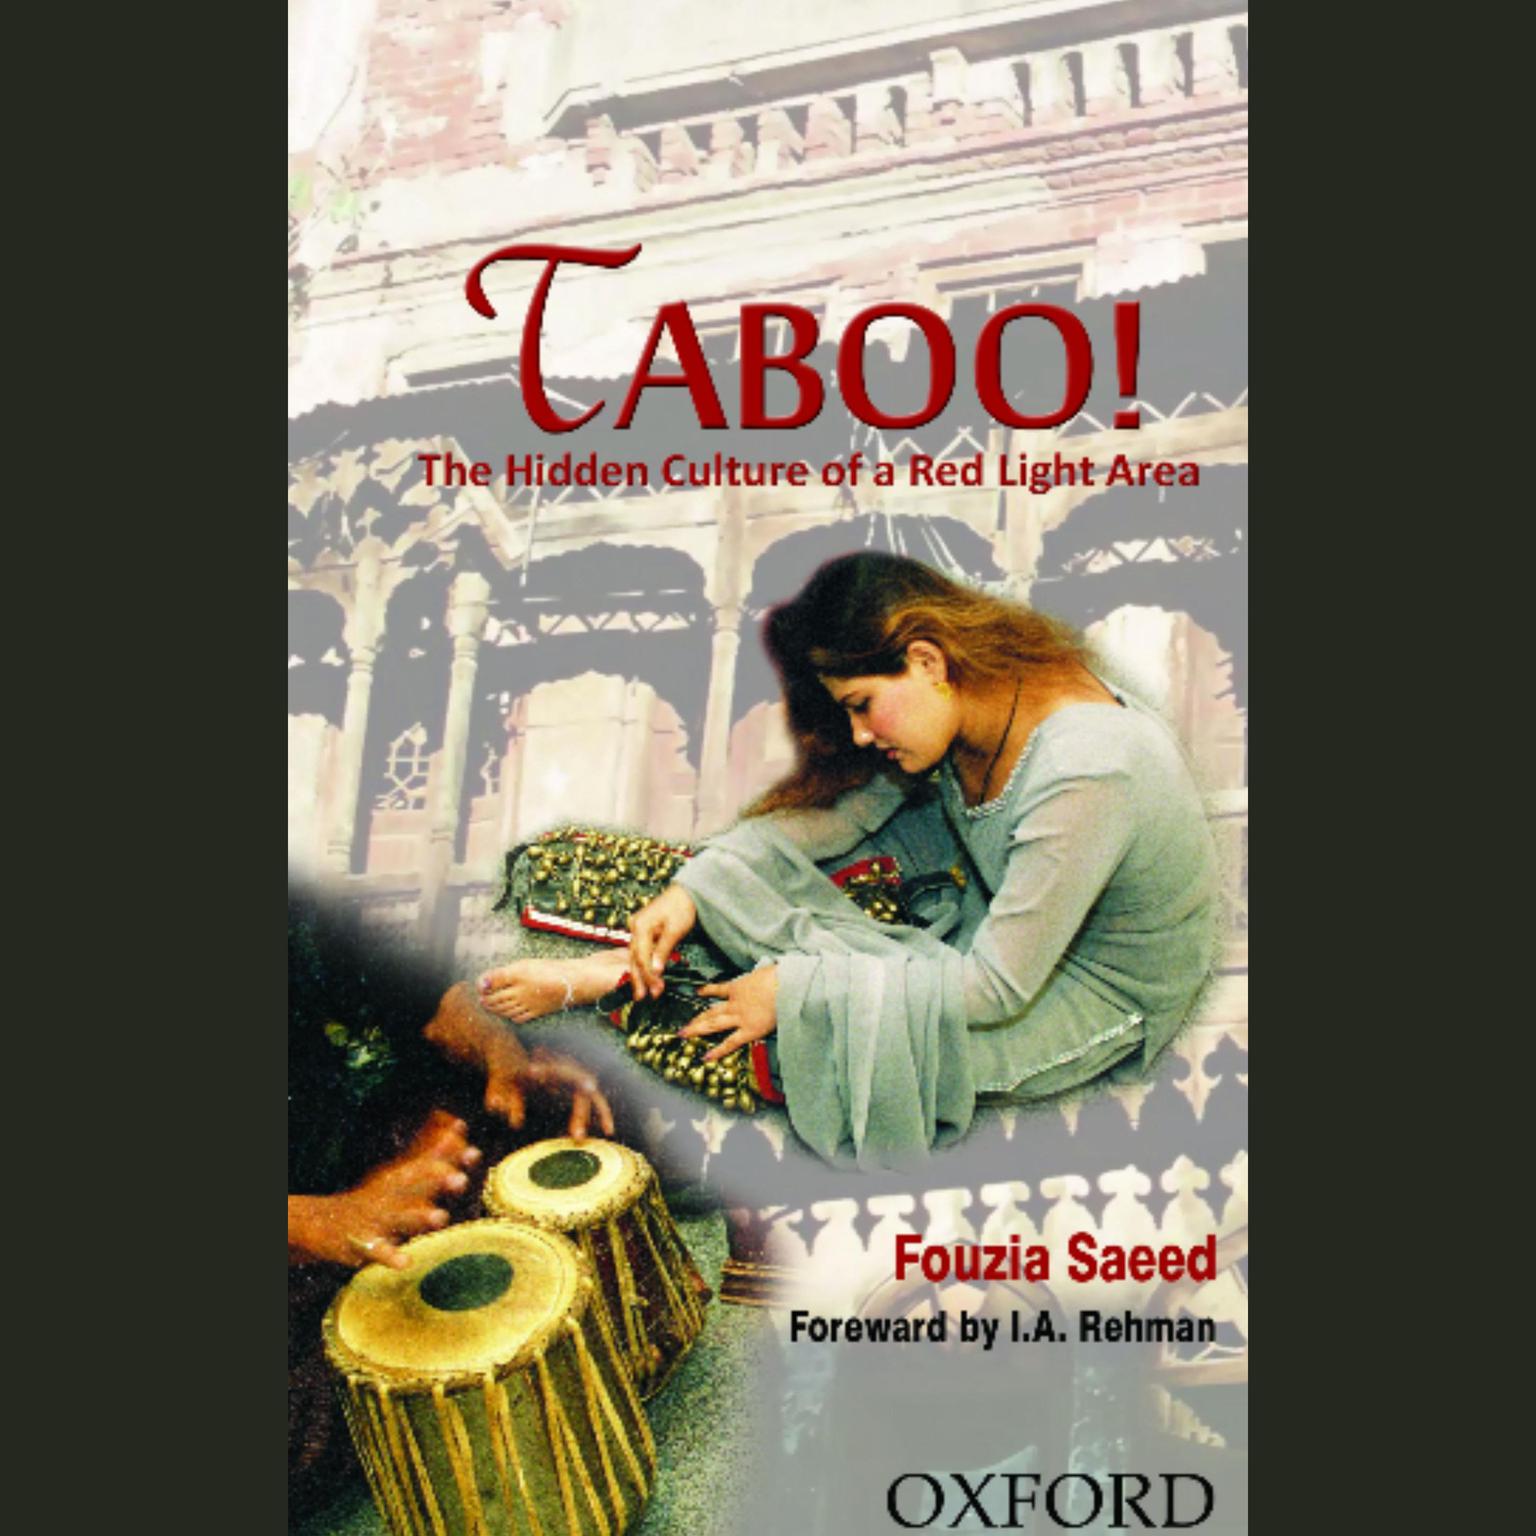 Taboo!: The Hidden Culture of a Red Light Area Audiobook, by Fouzia Saeed